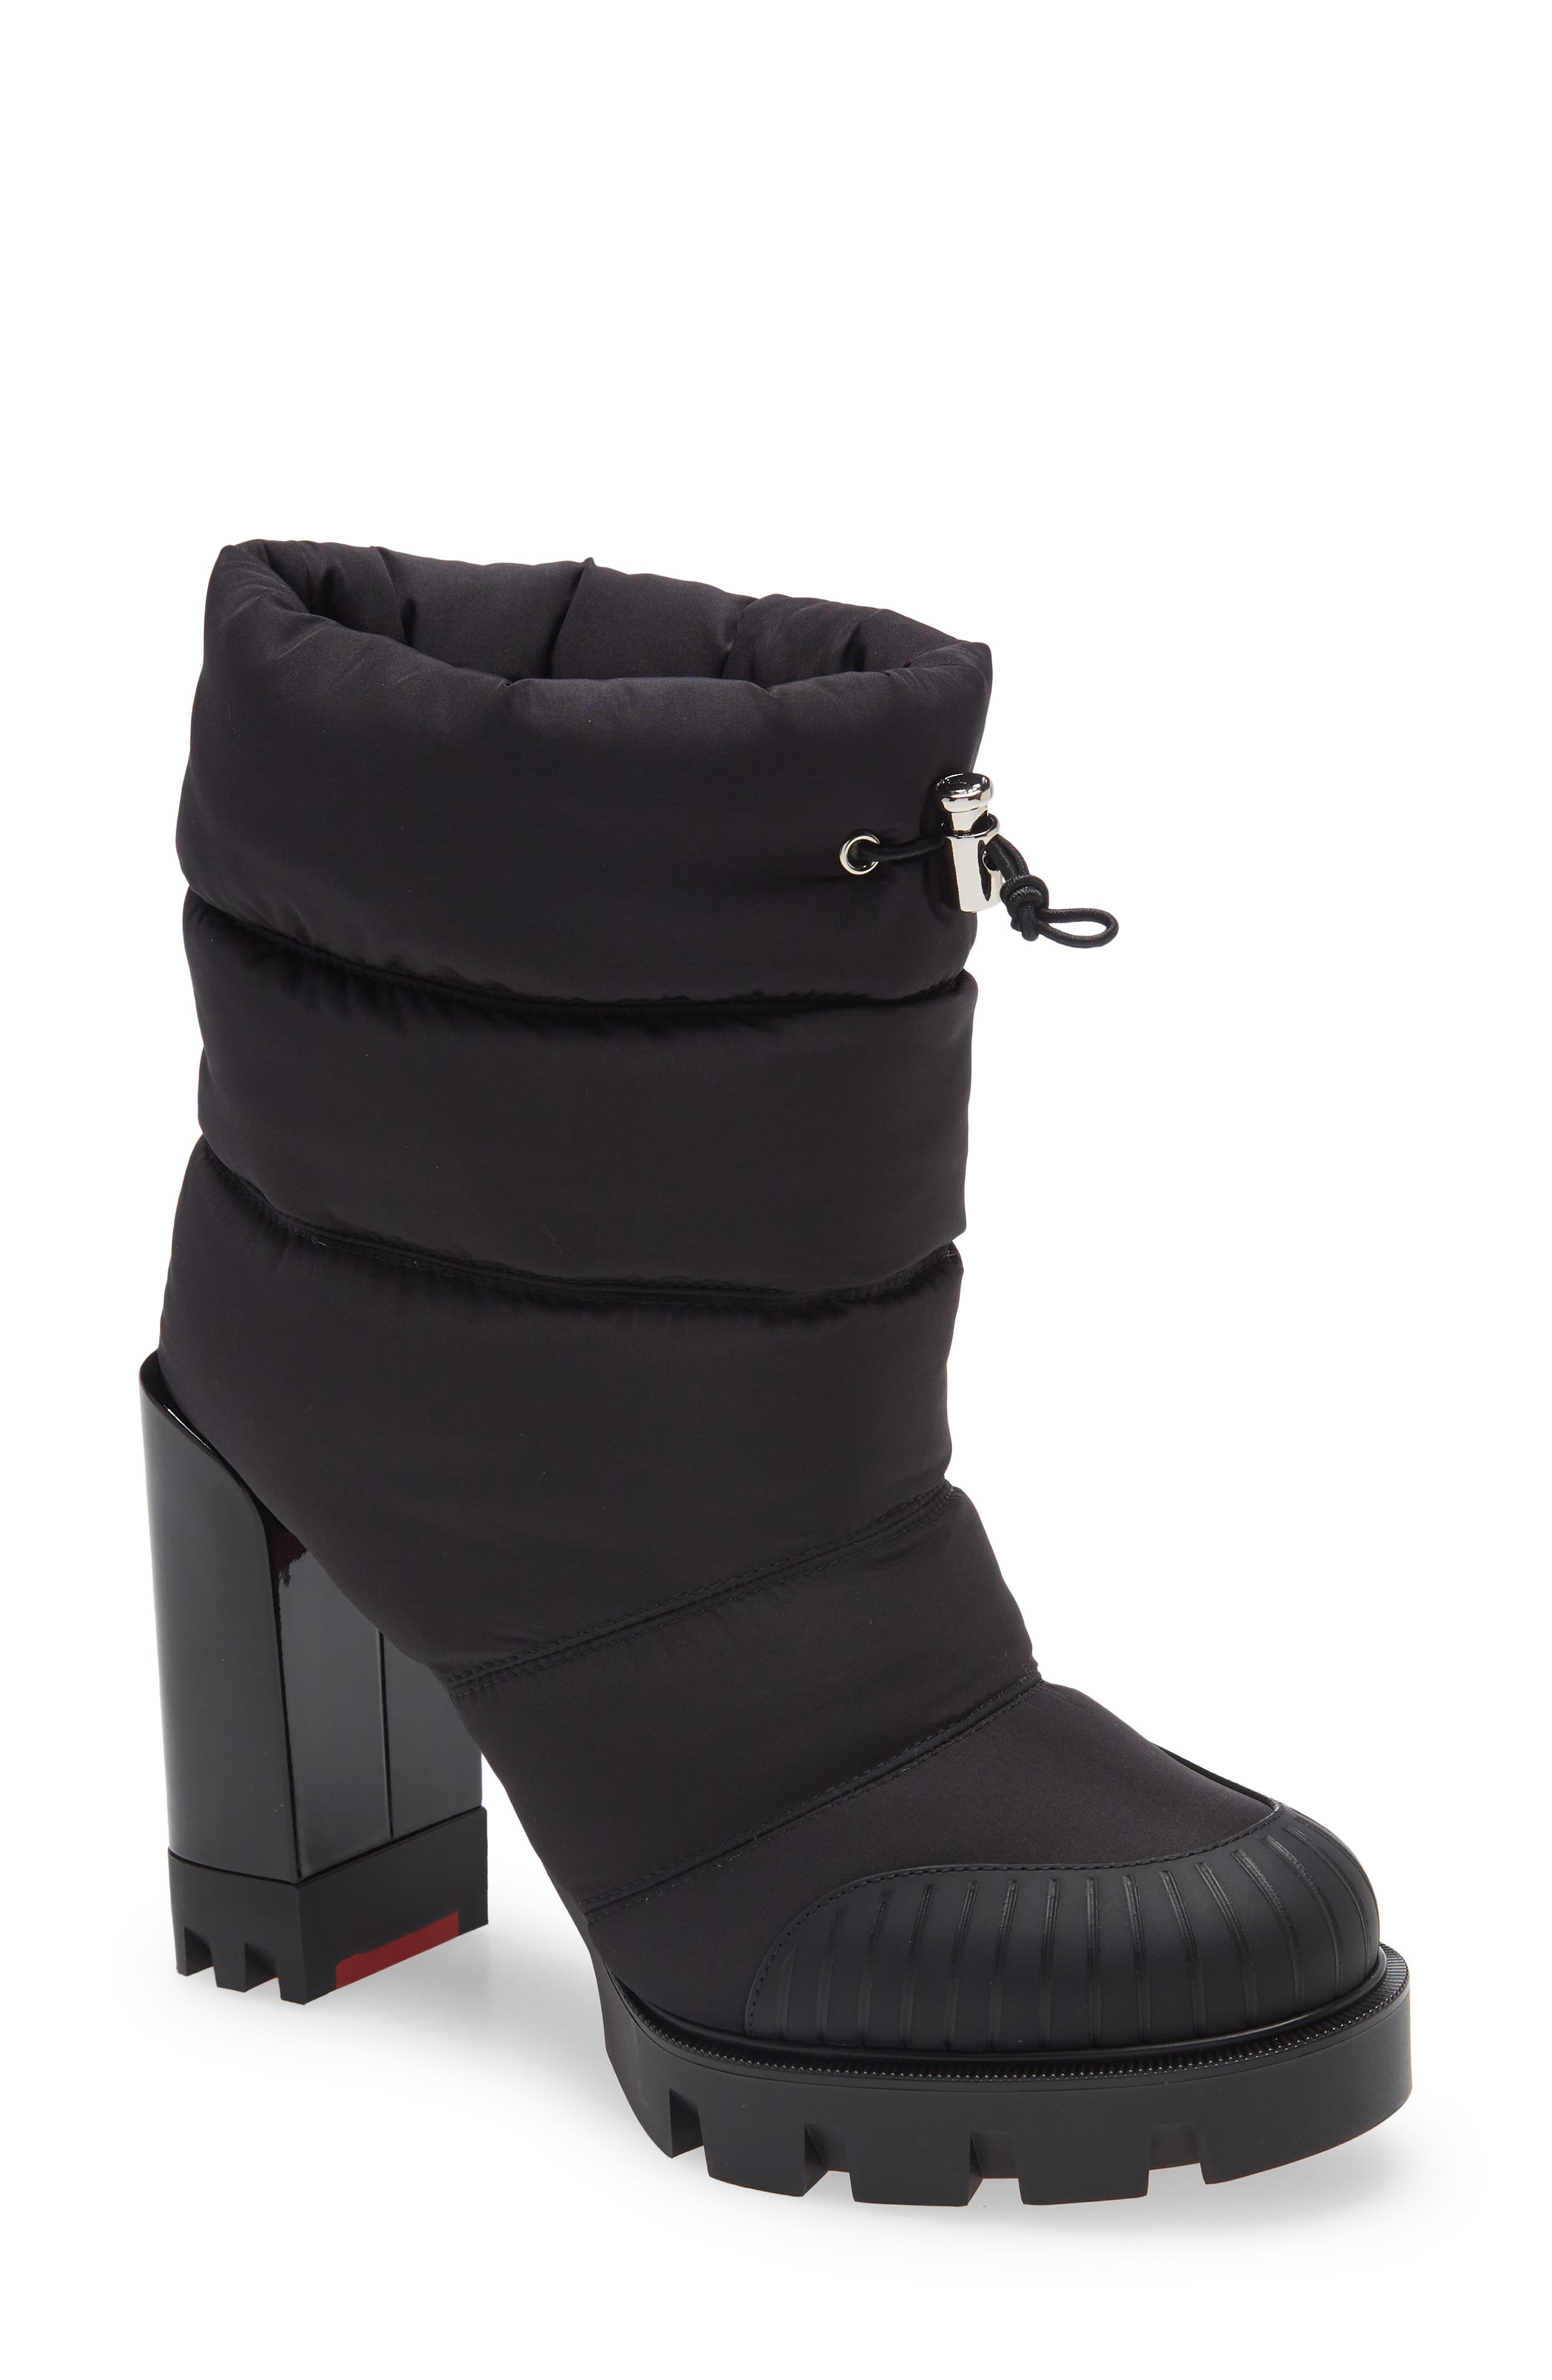 Christian Louboutin Oriona Channel Quilted Bootie in Black at Nordstrom